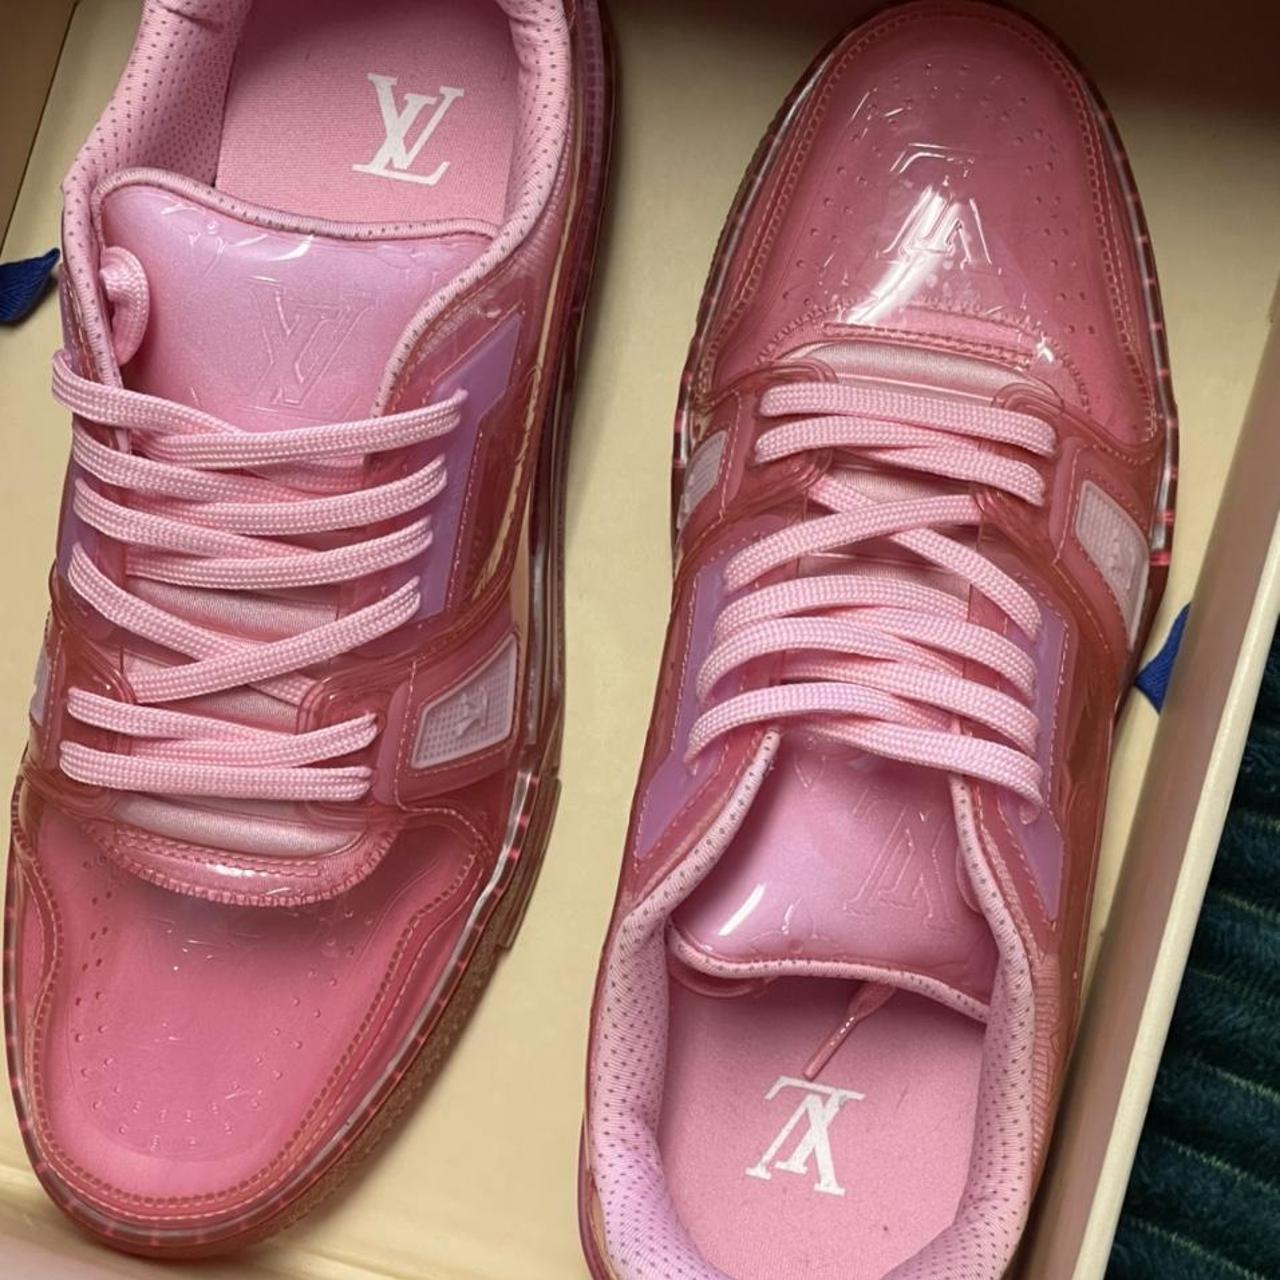 Louis Vuitton - Authenticated LV Trainer Trainer - Leather Pink Plain for Men, Never Worn